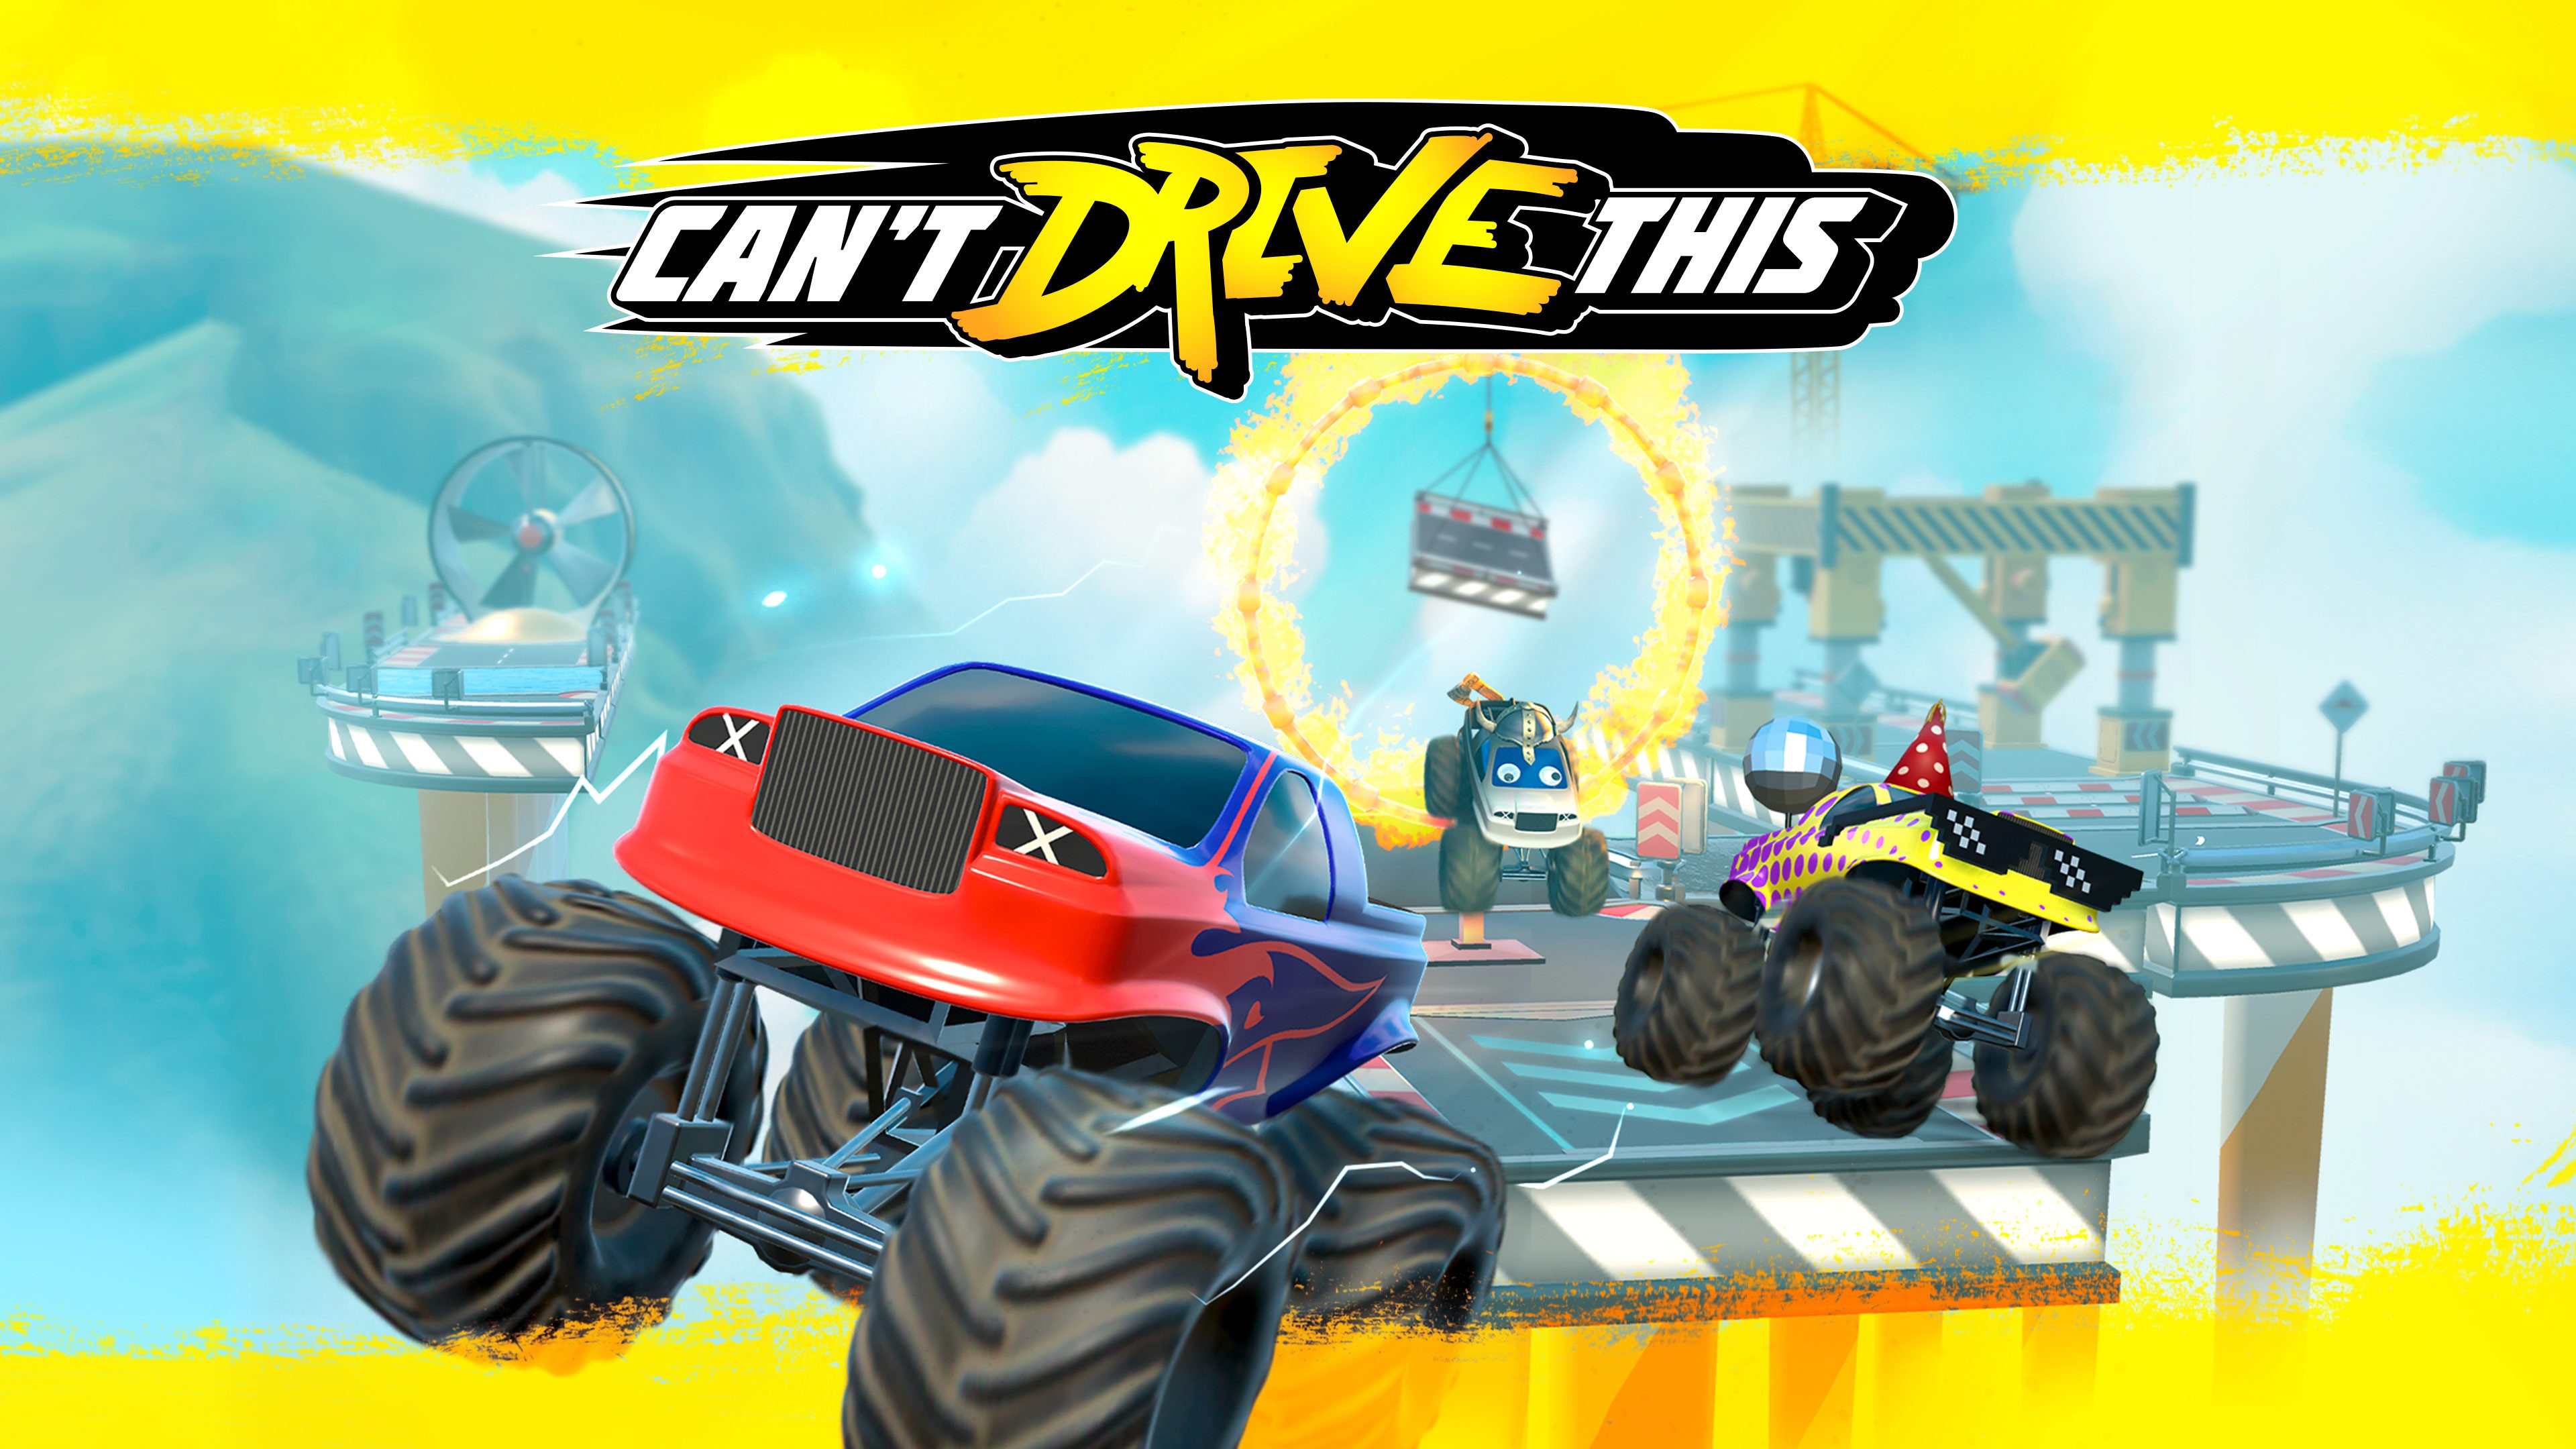 Video For Can’t Drive This Is Now Available For Xbox One And Xbox Series X|S